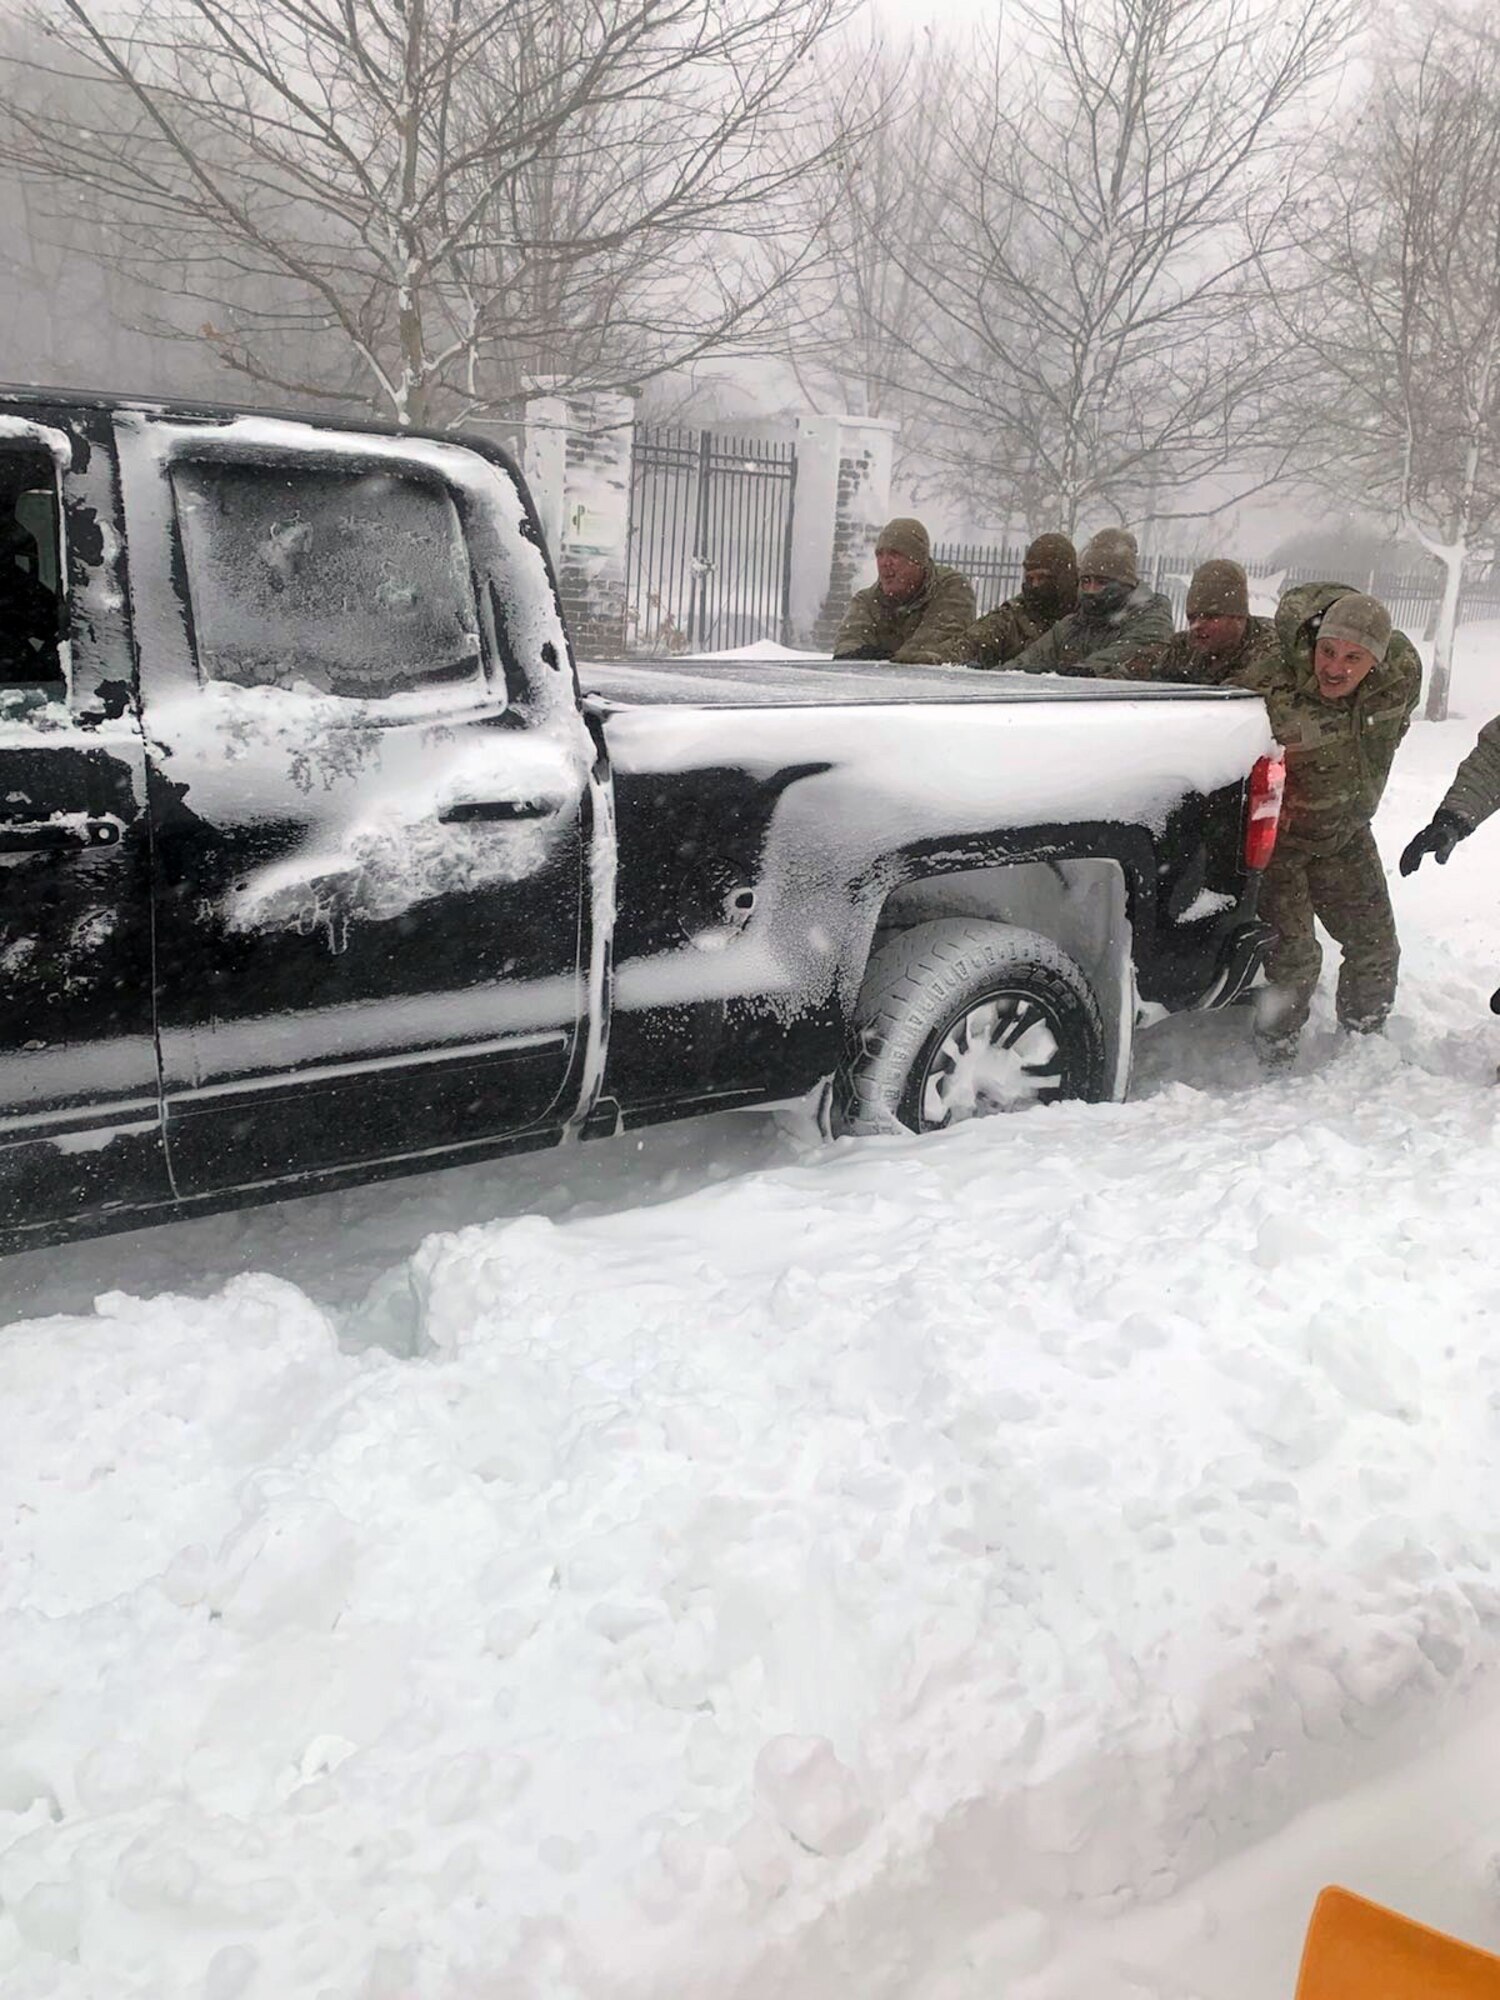 New York Air National Guard Airmen assigned to the 107th Attack Wing at Niagara Falls Air Reserve Station assist motorists stuck in snow drifts near Buffalo, New York, Dec. 25, 2022, during whiteout blizzard conditions.